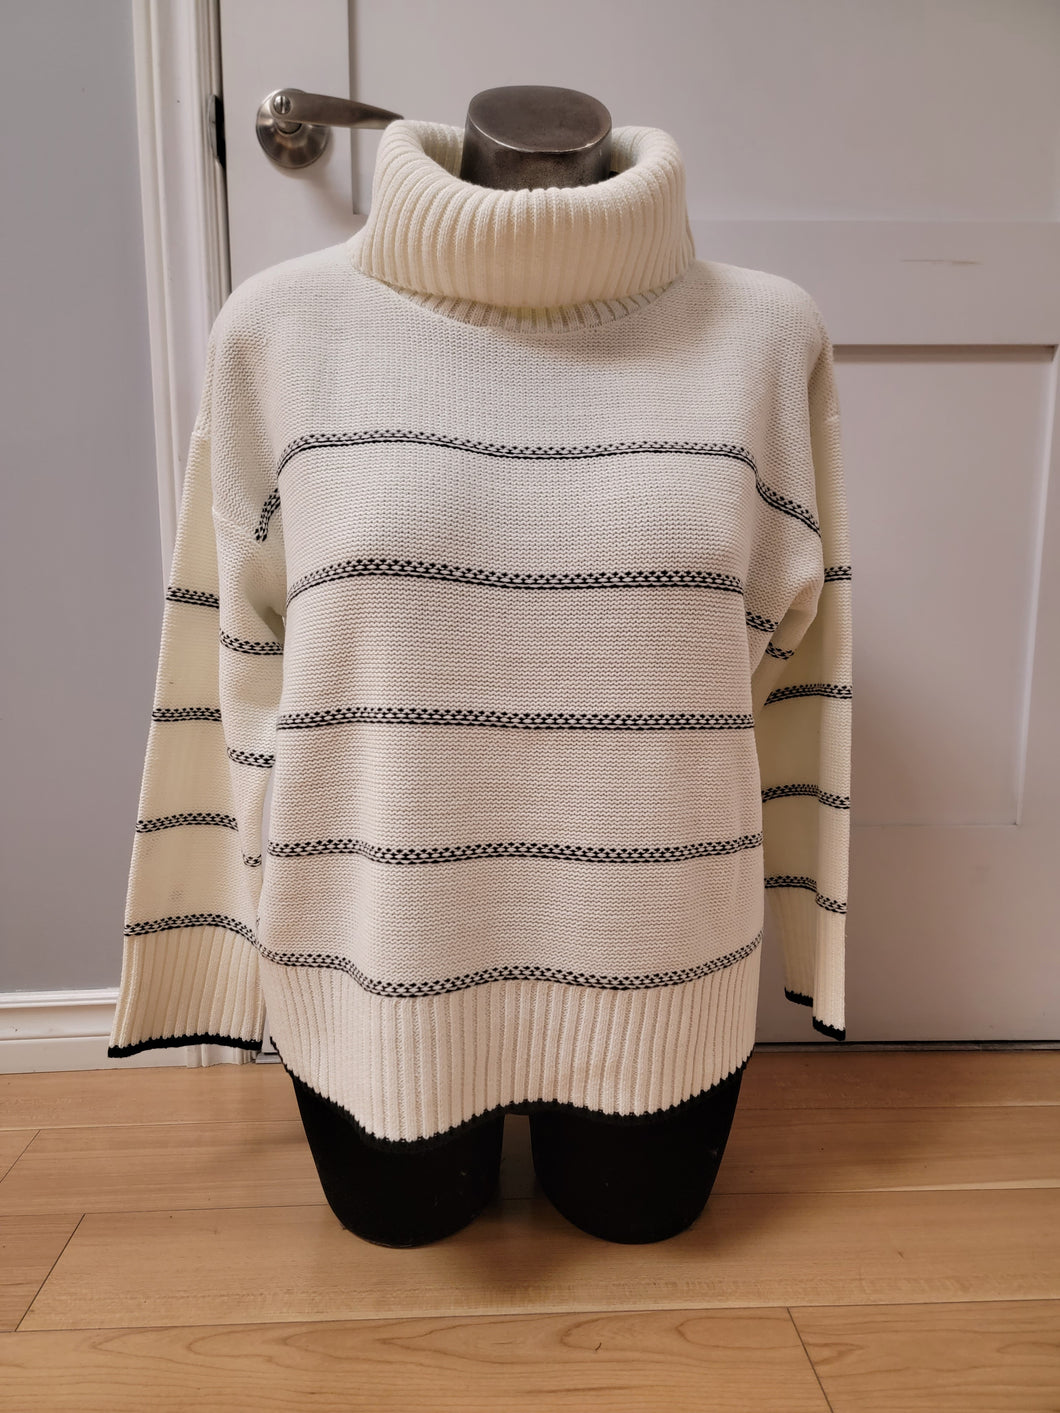 Striped Turtleneck Sweater by Sunday available in plus sizes